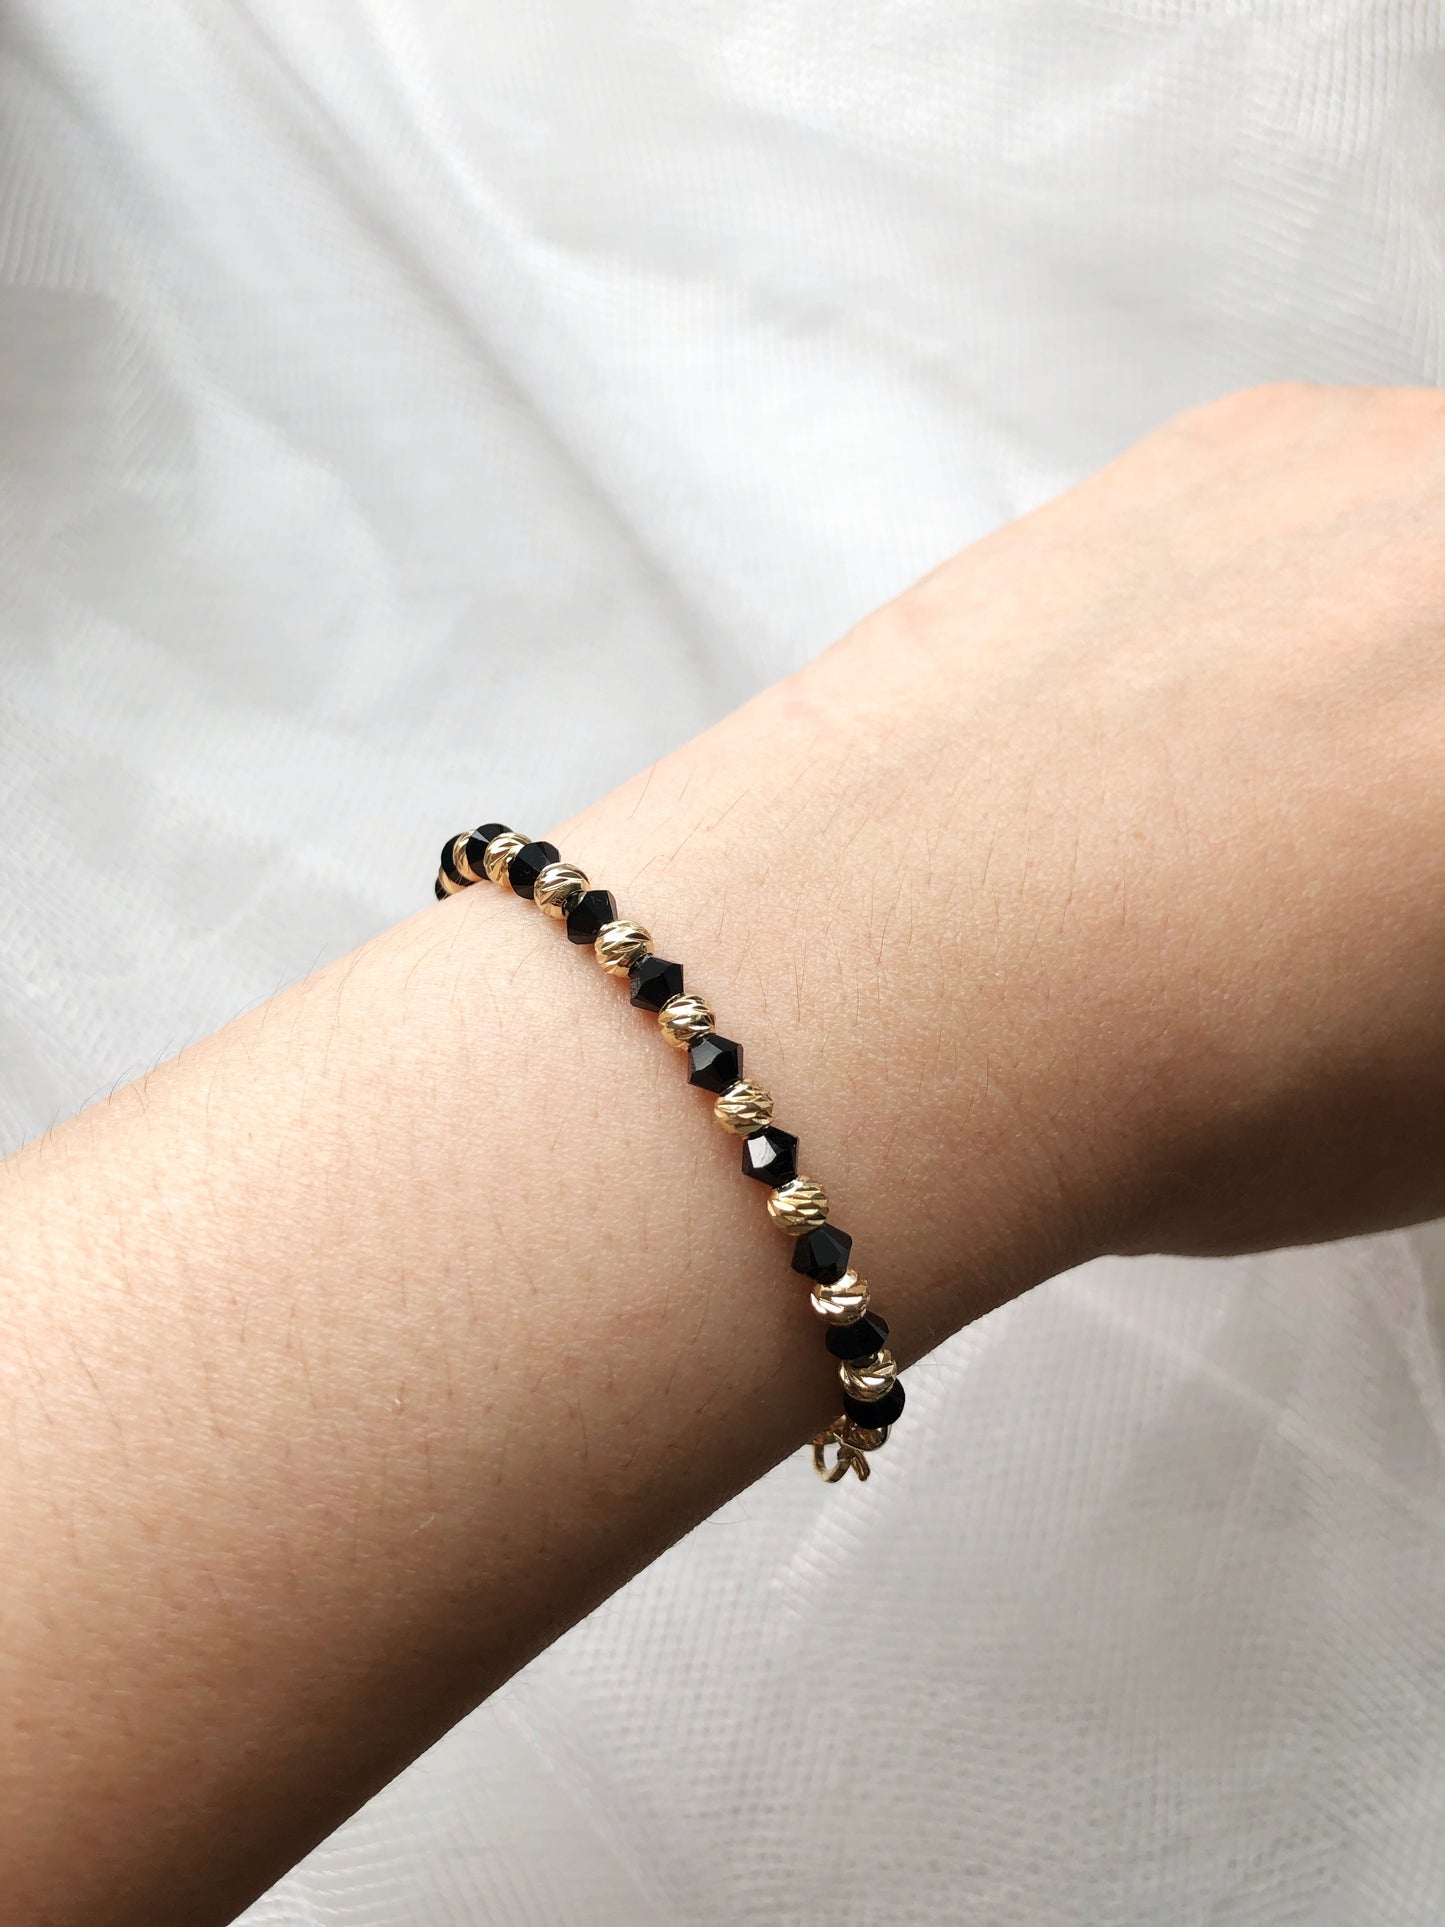 Swarovski crystal and 14K gold plated beads bracelet in black and gold